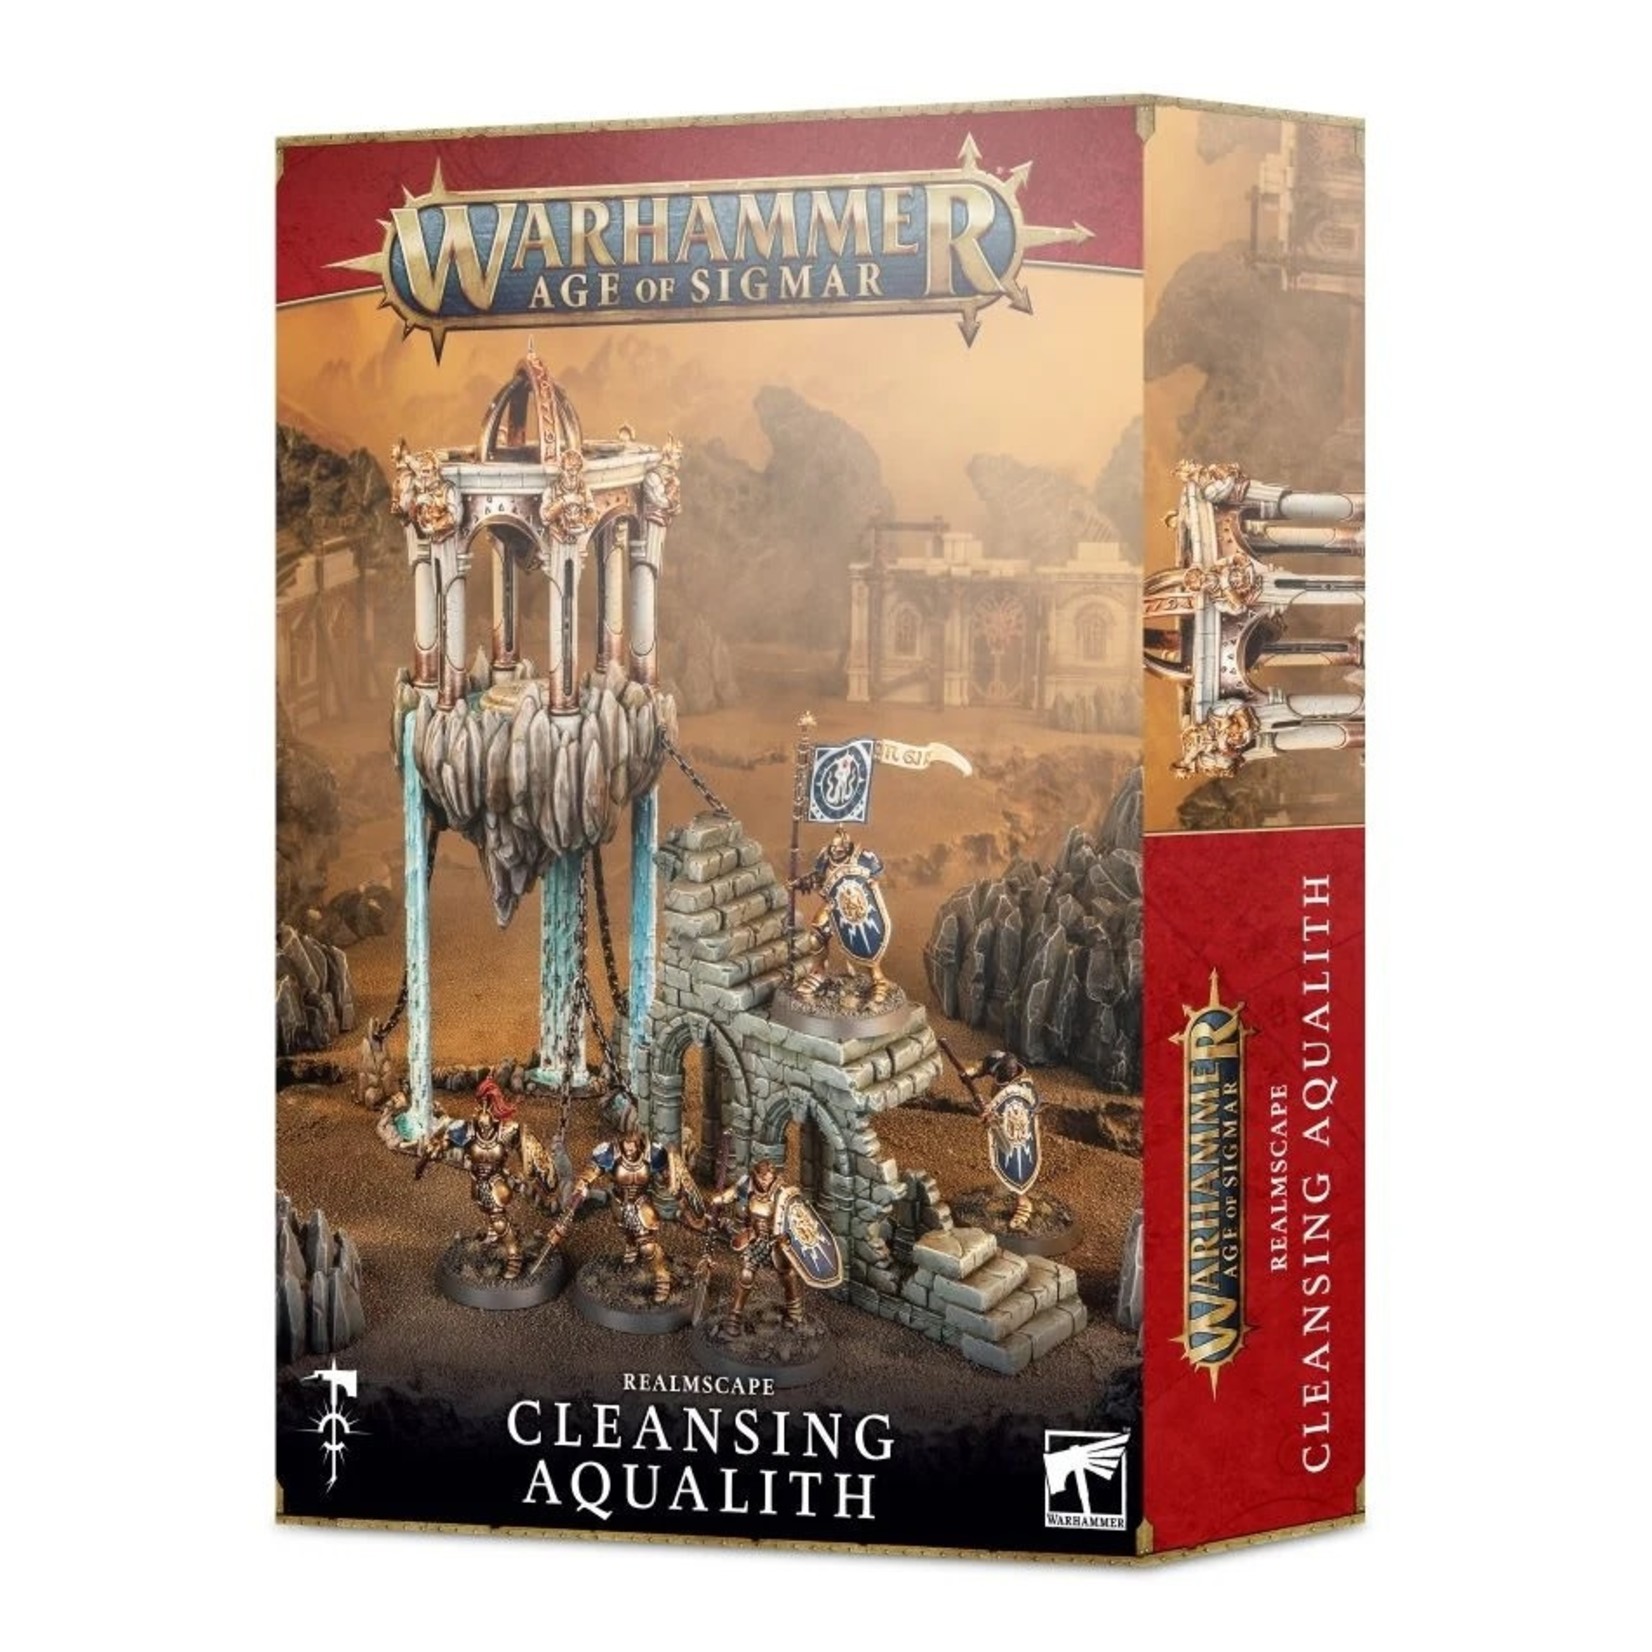 Age of Sigmar Realmscape Cleansing Aqualith